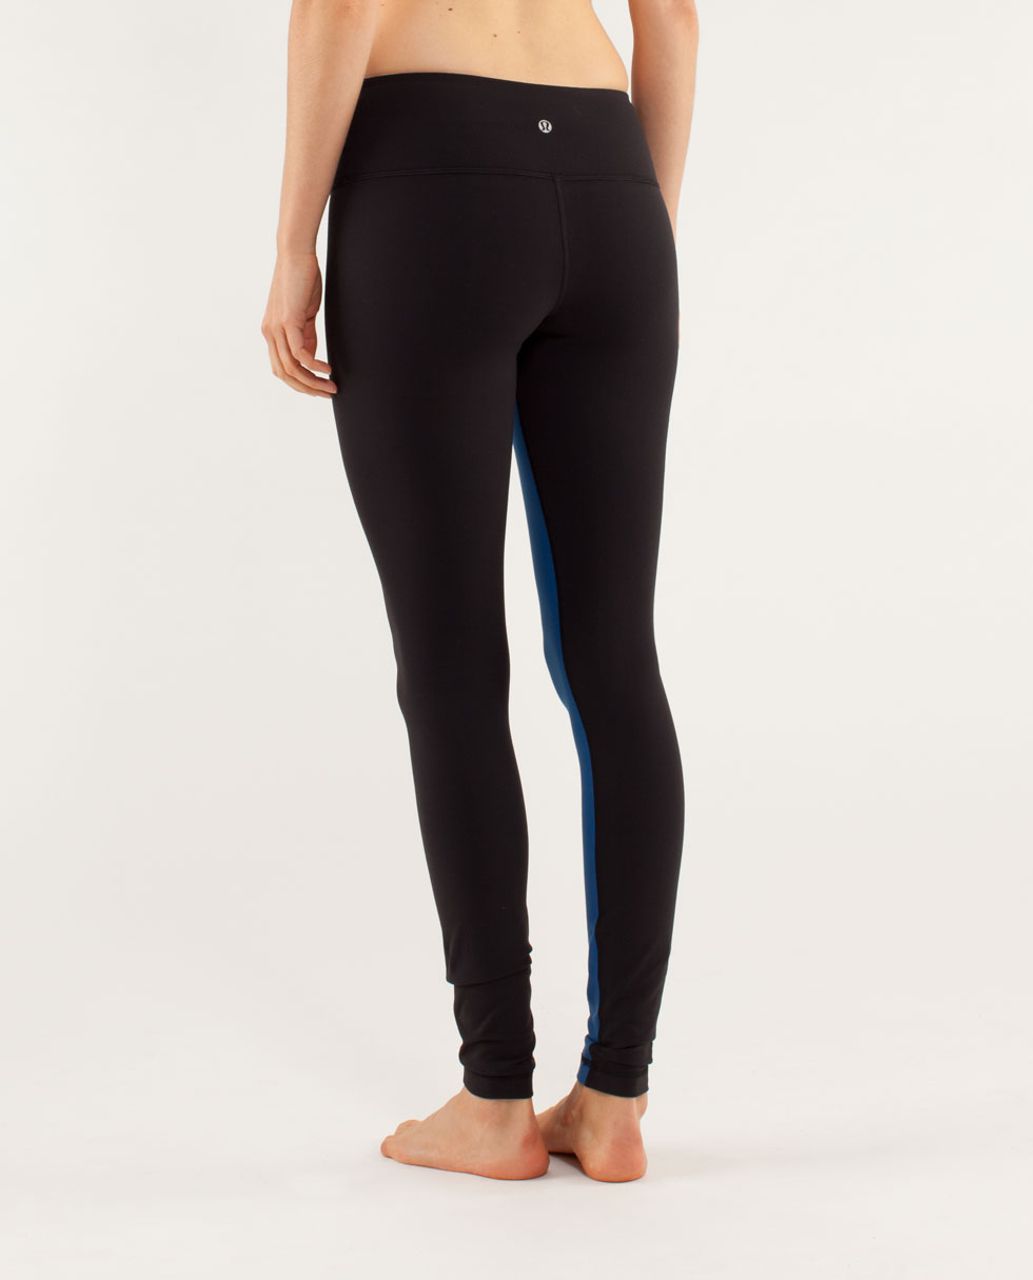 Lululemon Wunder Under Pant *Colour Blocked - Limitless Blue / Black / Wee Are From Space Polar Cream Clarity Yellow